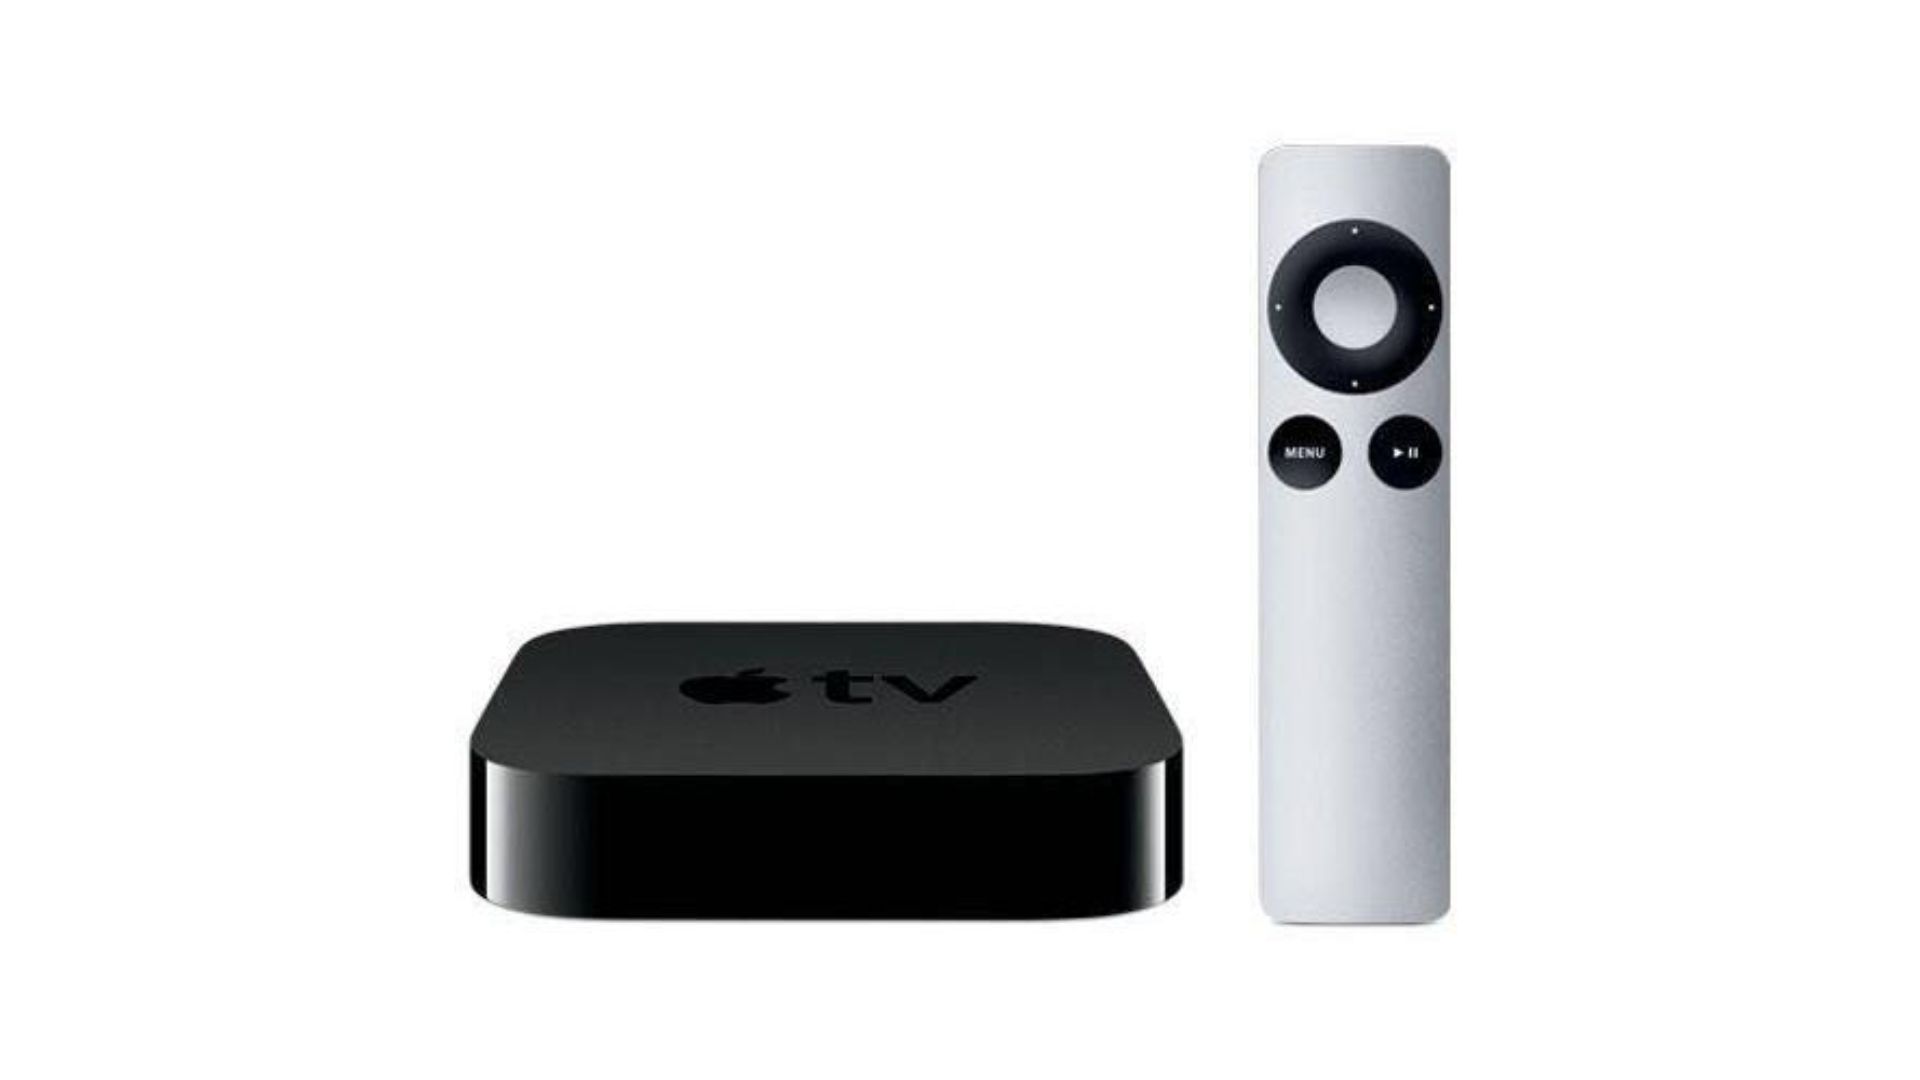 Netflix to End Support for 2nd and 3rd Generation Apple TV